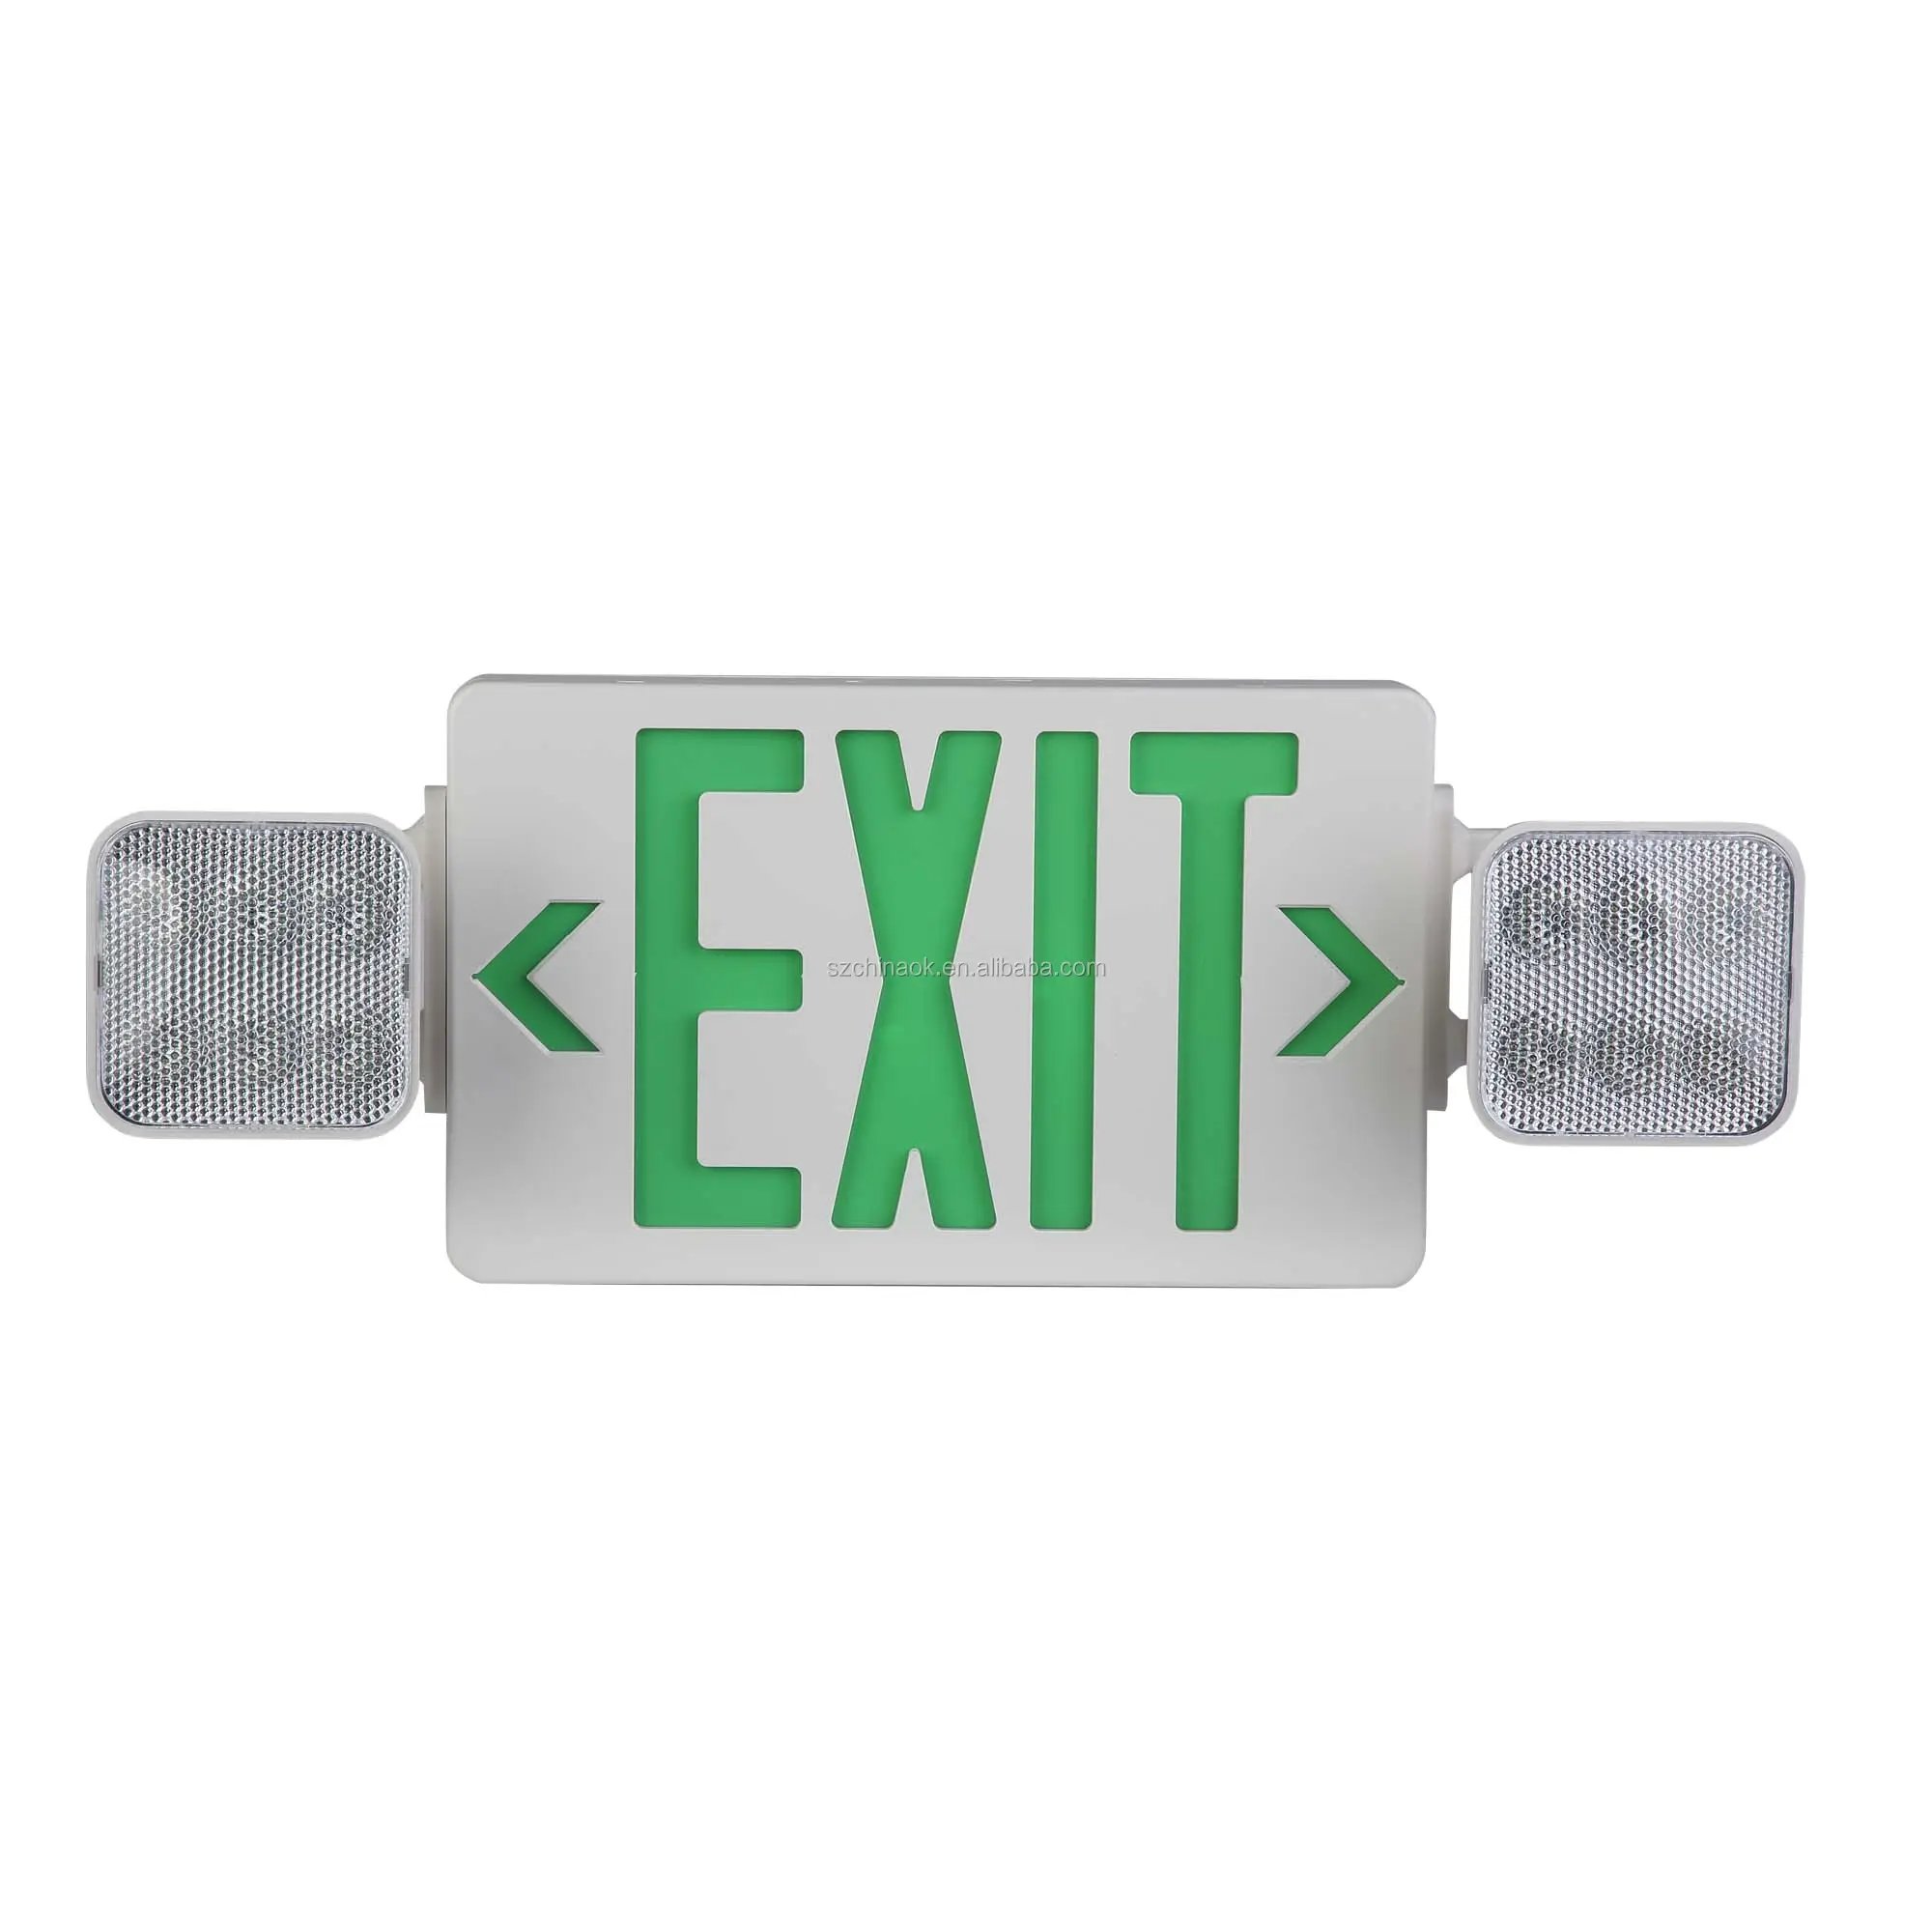 American standard 120/277V rechargeable backup battery wall mount emergency exit sign combo led emergency light